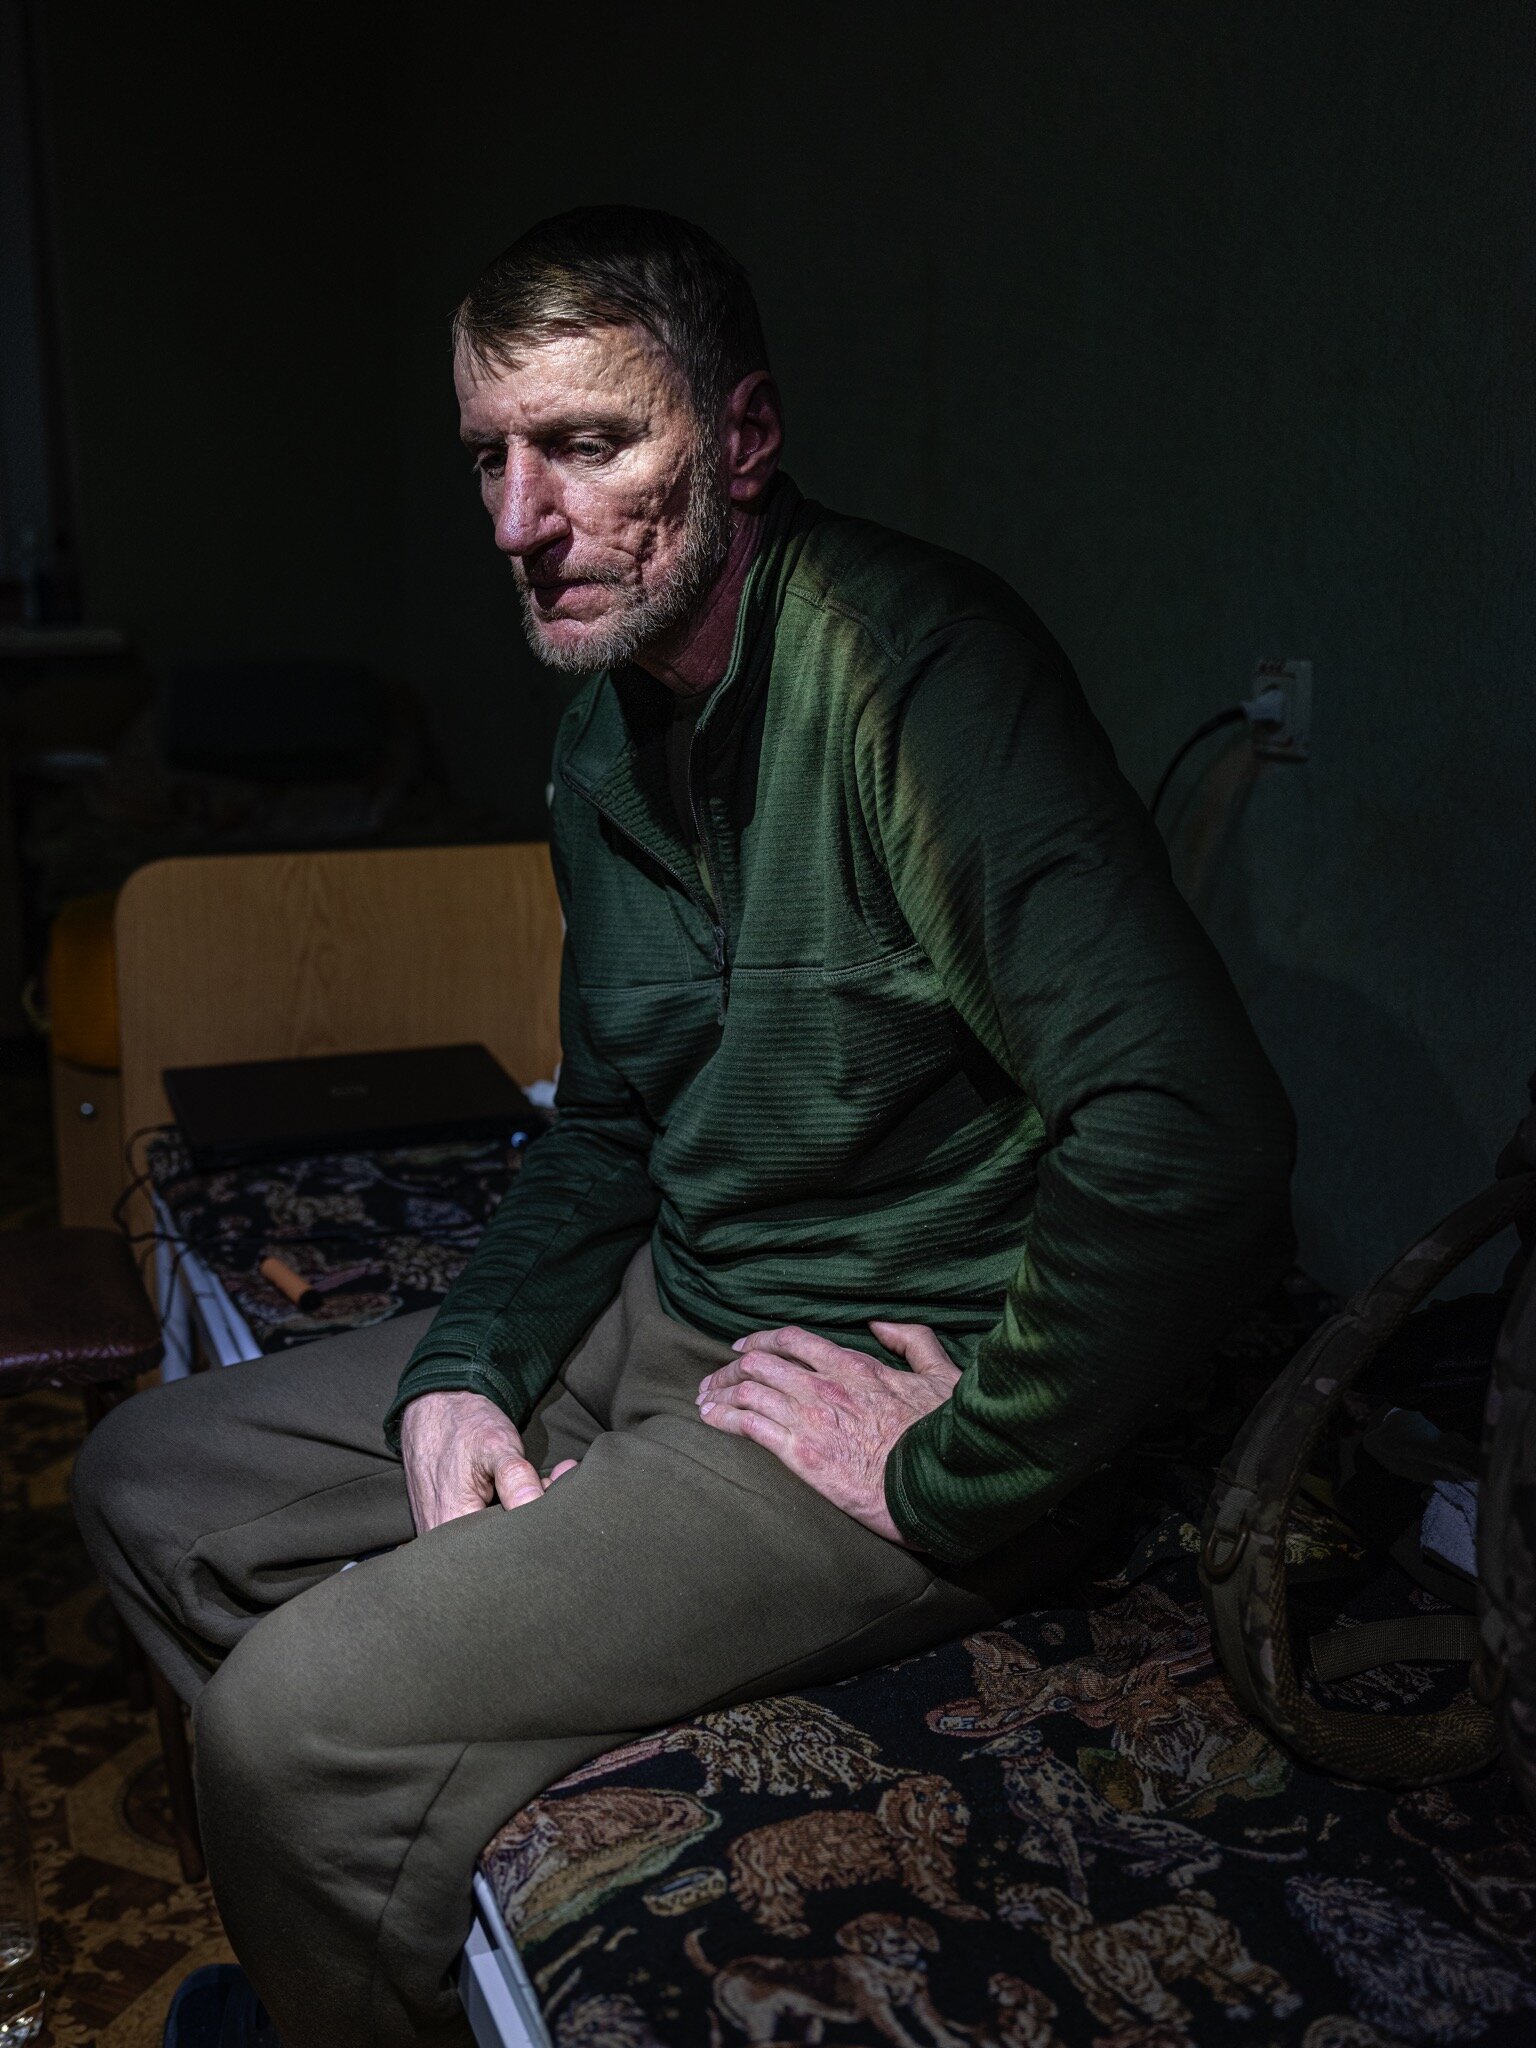 19mag-Ukraine-05-mobileMasterAt3x ‘I Live in Hell’: The Psychic Wounds of Ukraine’s Soldiers